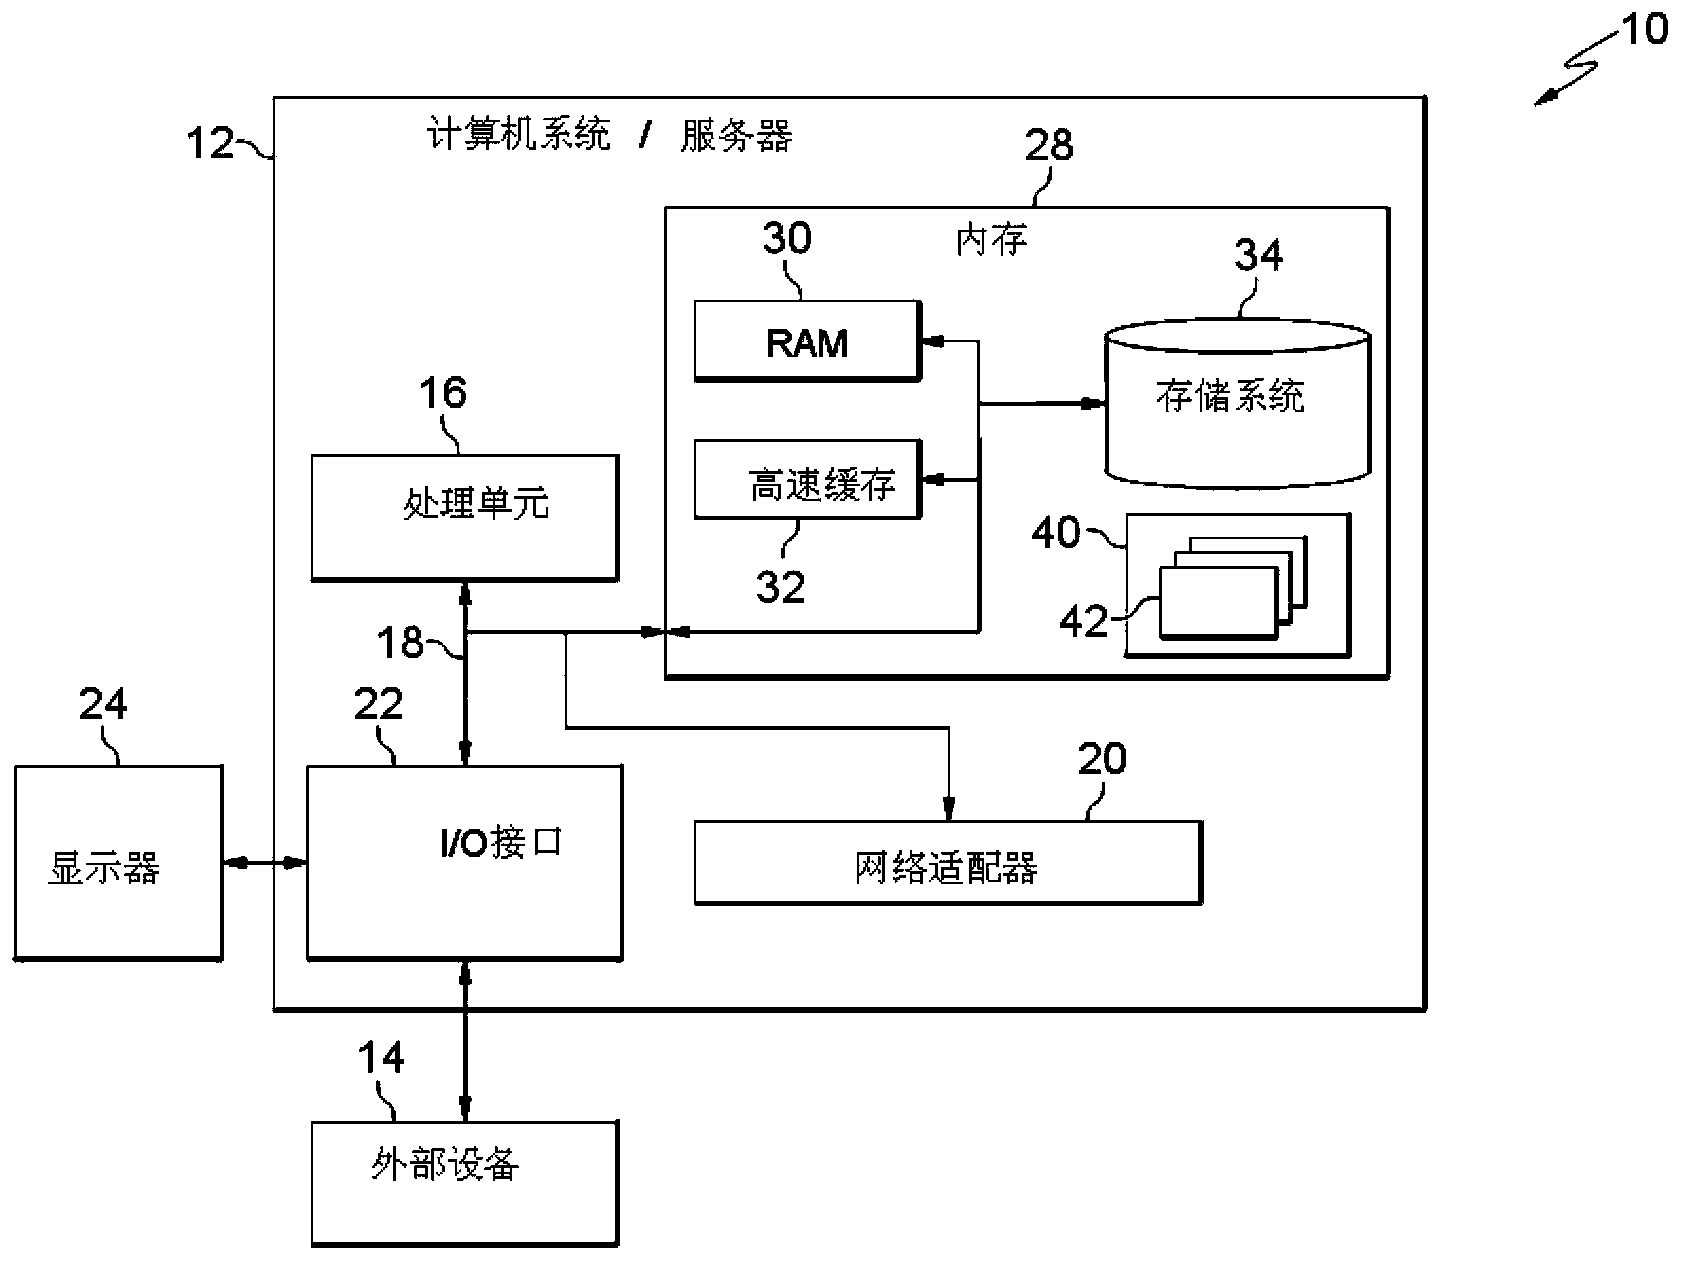 Method and device for calculating line loss of distribution network